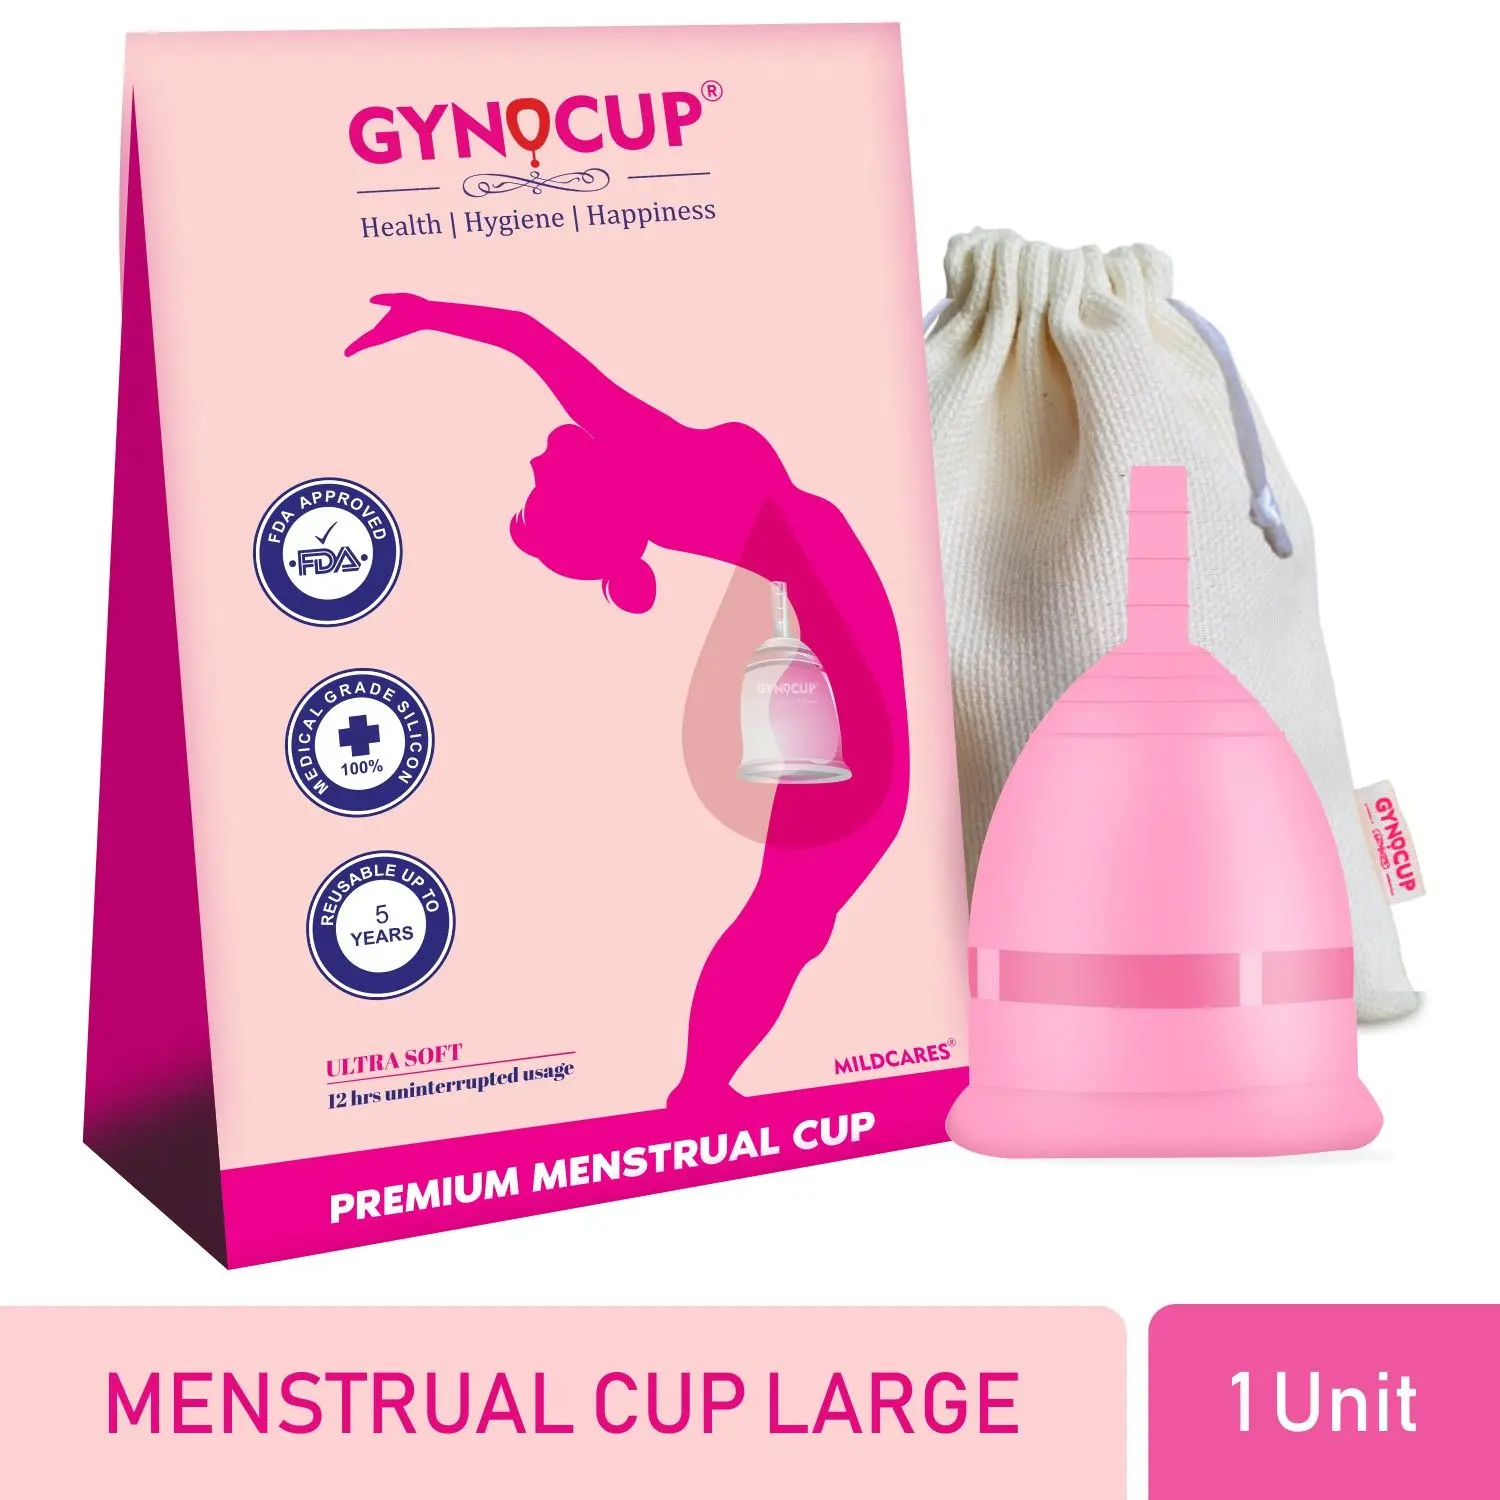 GynoCup Reusable Menstrual Cup for Women| | Large Size with Pouch | 100% Medical Grade Silicone | Wearable Upto 12 hours | No leakage | Ultra Soft, Odour & Rash free | FDA Approved